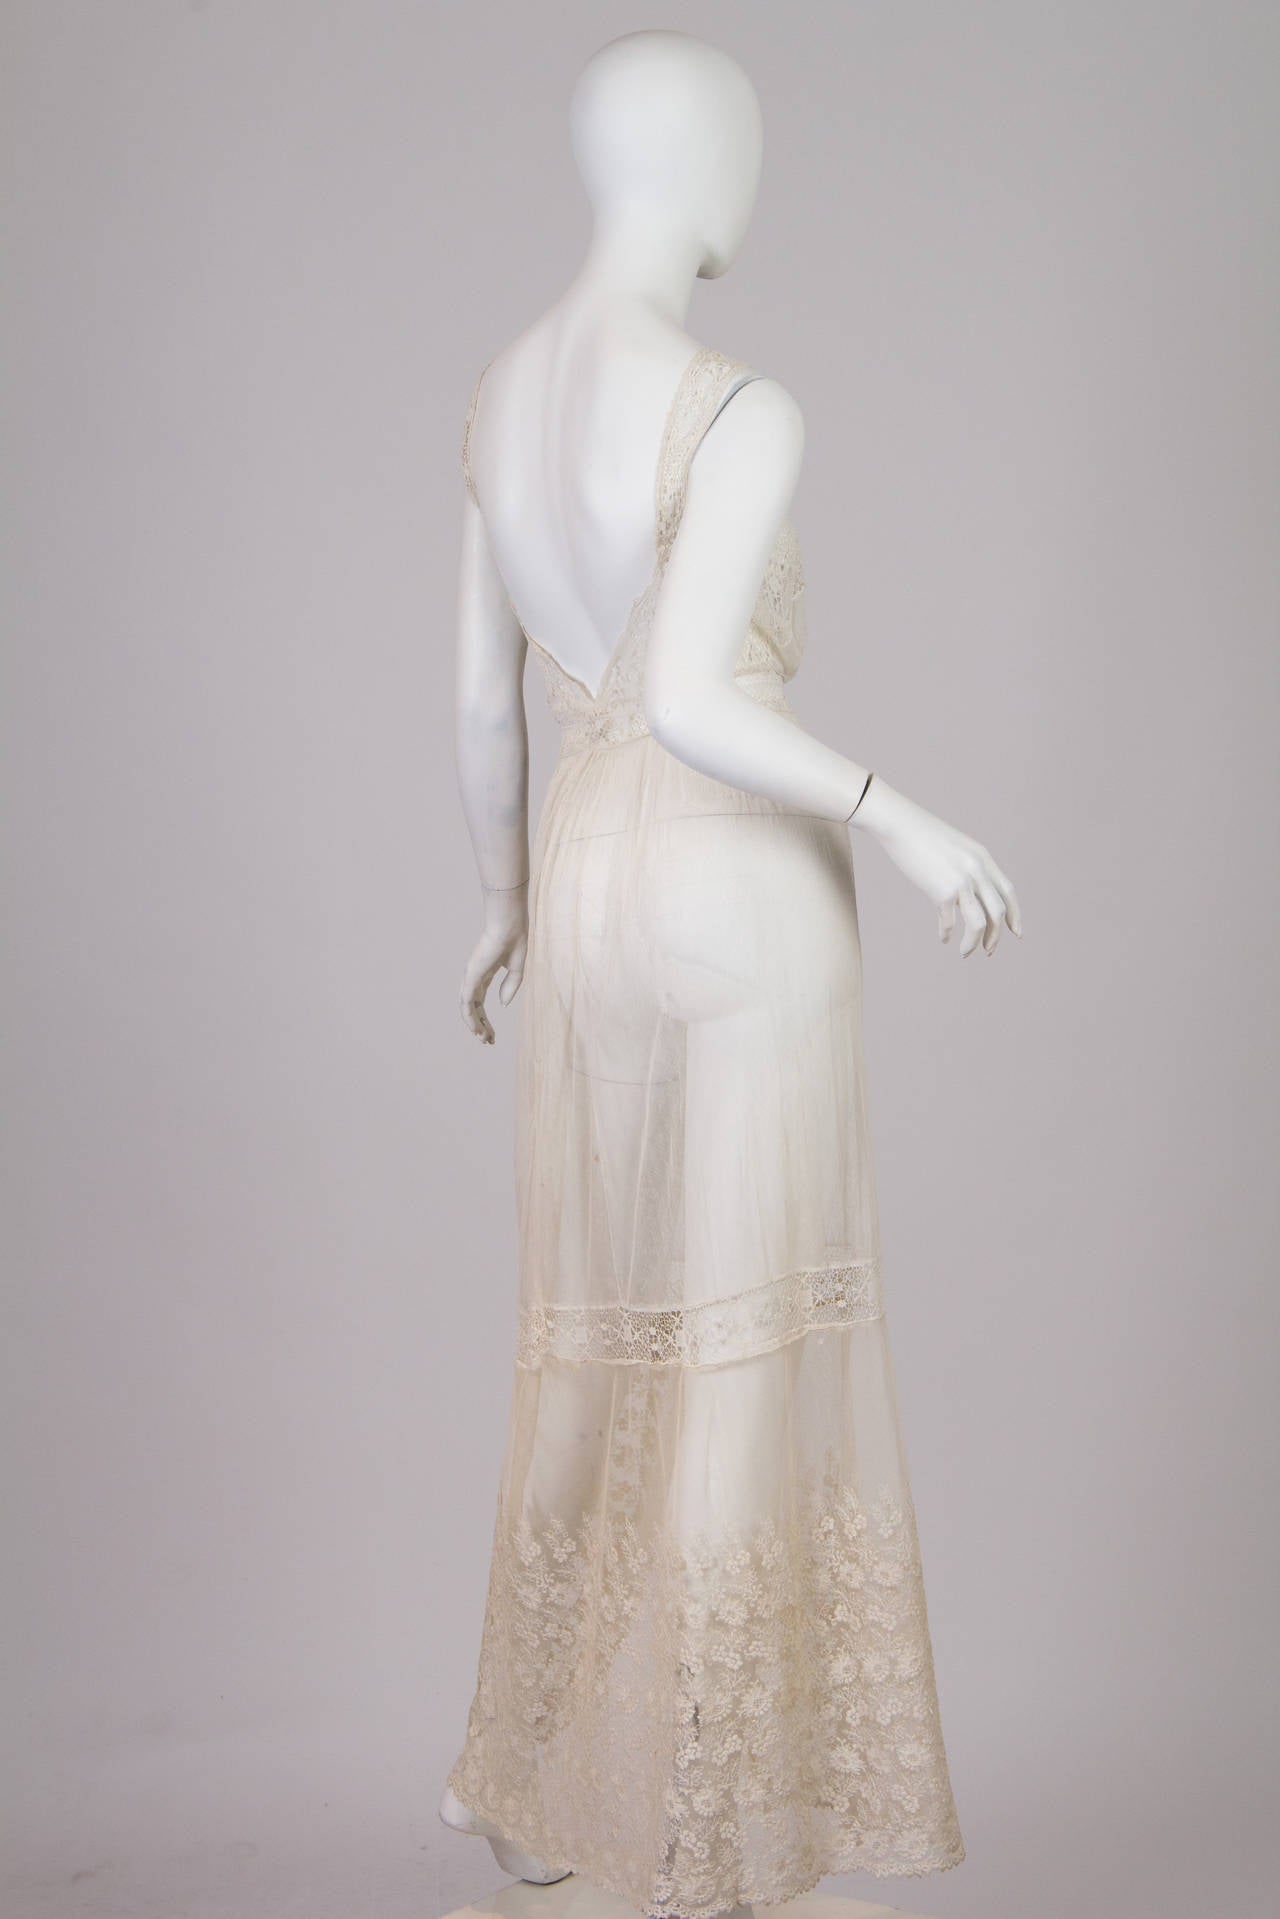 This dress in 100 years old, from around 1910-1915. We have altered it slightly to repair it. We have taken in some of the blousing from the front and lowered the back, updating it for todays woman. The slit is an interesting detail which is